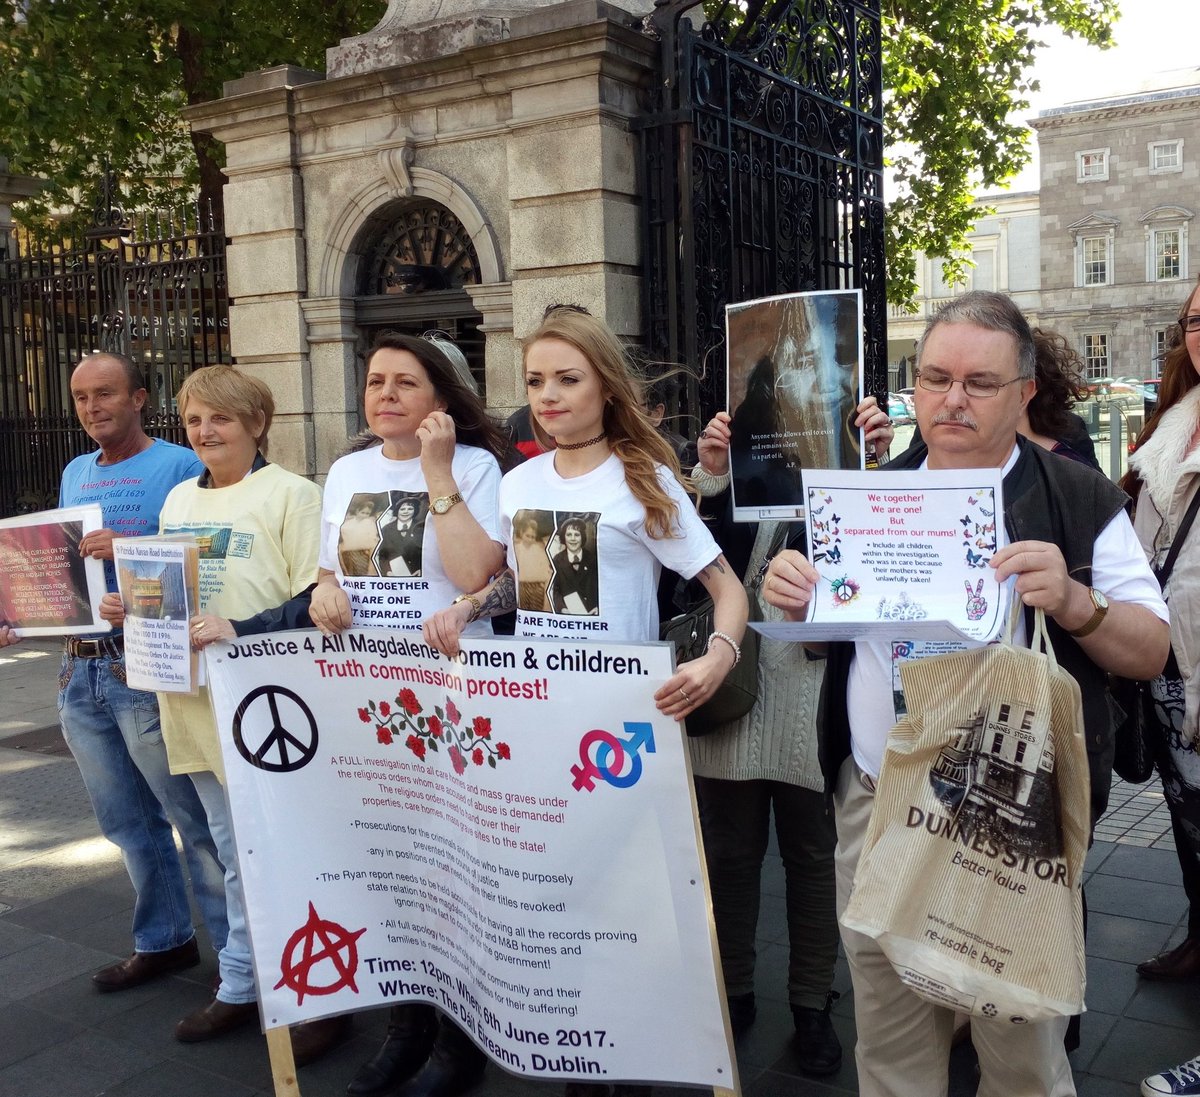 In 2017, I spoke with survivors of the mother and baby institutions at this protest and started  #RepublicofShame. The final report was due within months. They had been fighting a culture of silence for years. Survivors I met have died waiting for answers.  https://www.bookdepository.com/Republic-Shame-Caelainn-Hogan/9780241984123